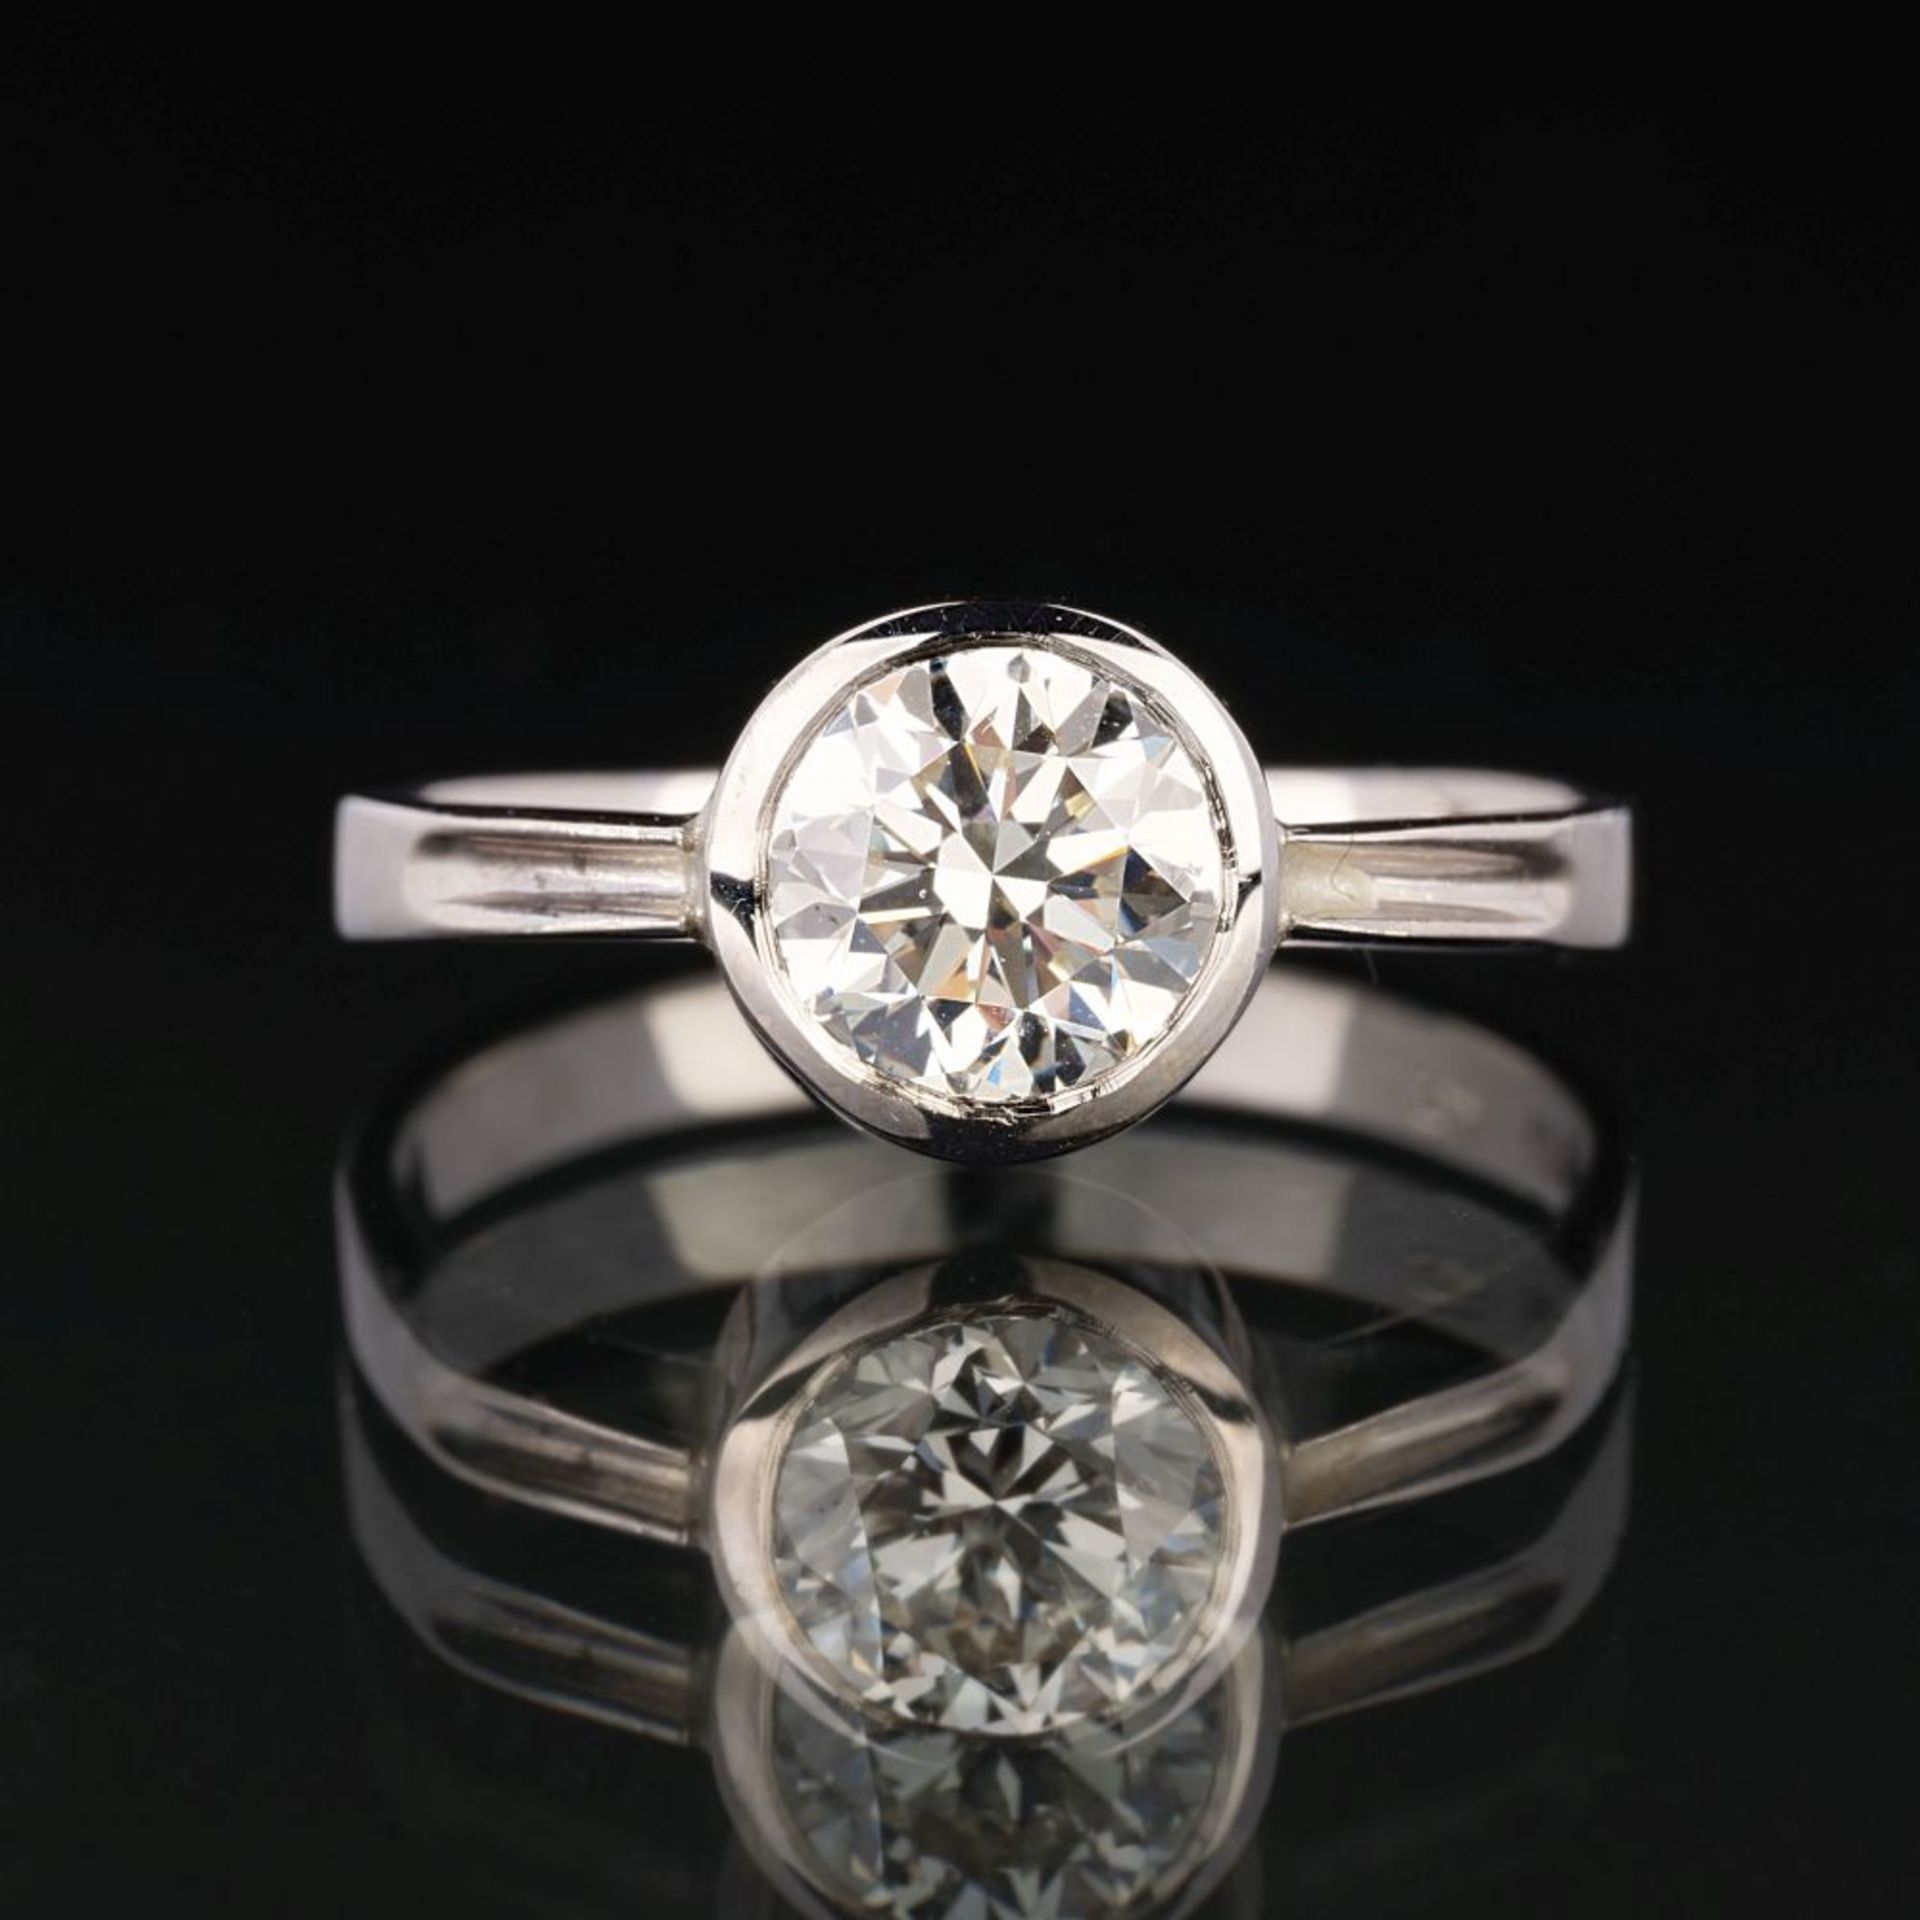 A Solitaire Diamond Ring.